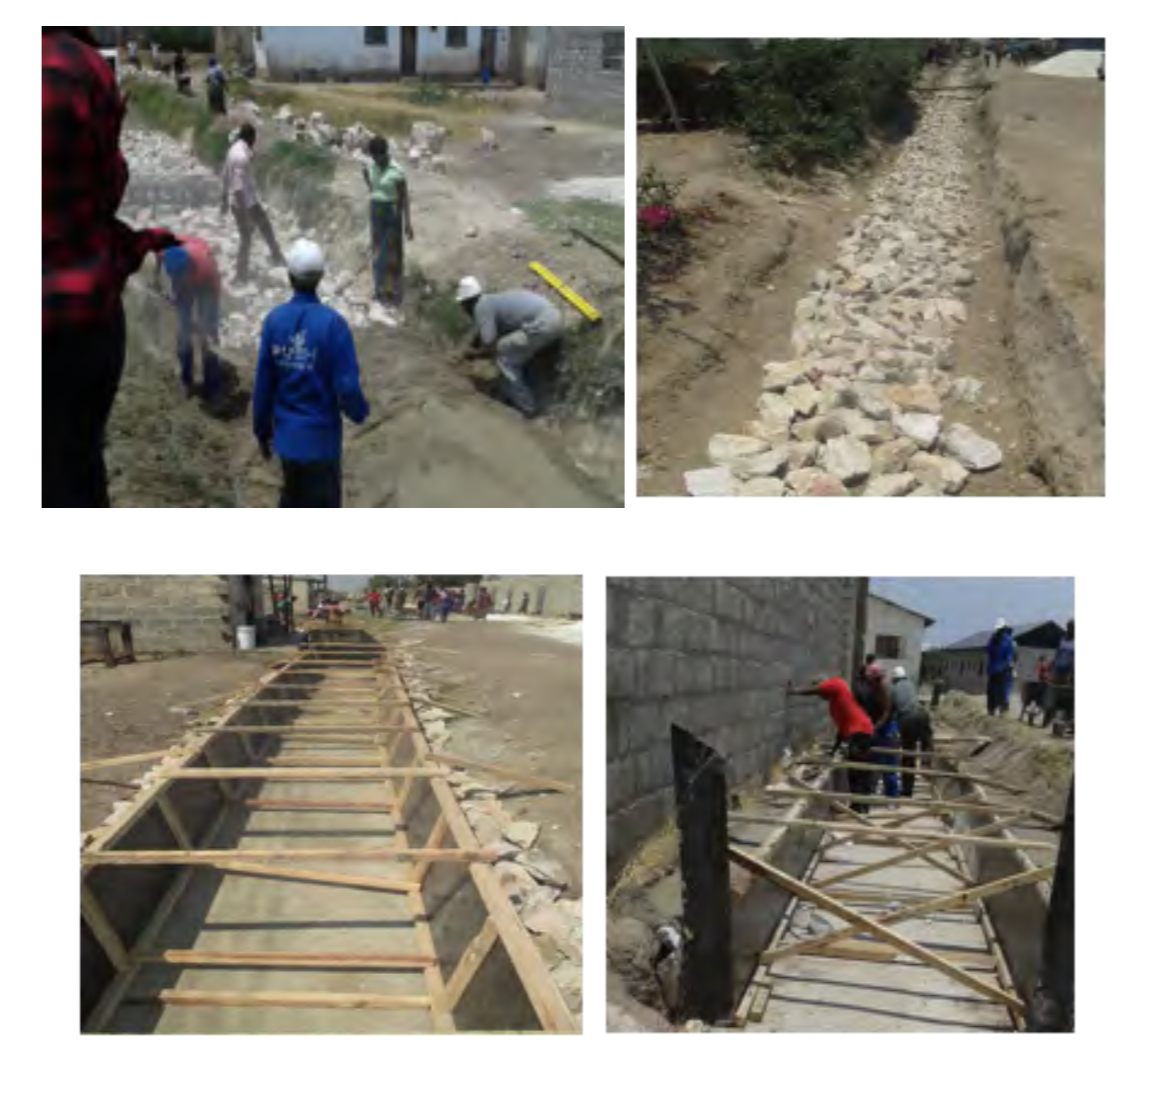 Excavation and concrete lining of the drainage. Pictures provided by: People’s Process on Housing and Poverty in Zambia.